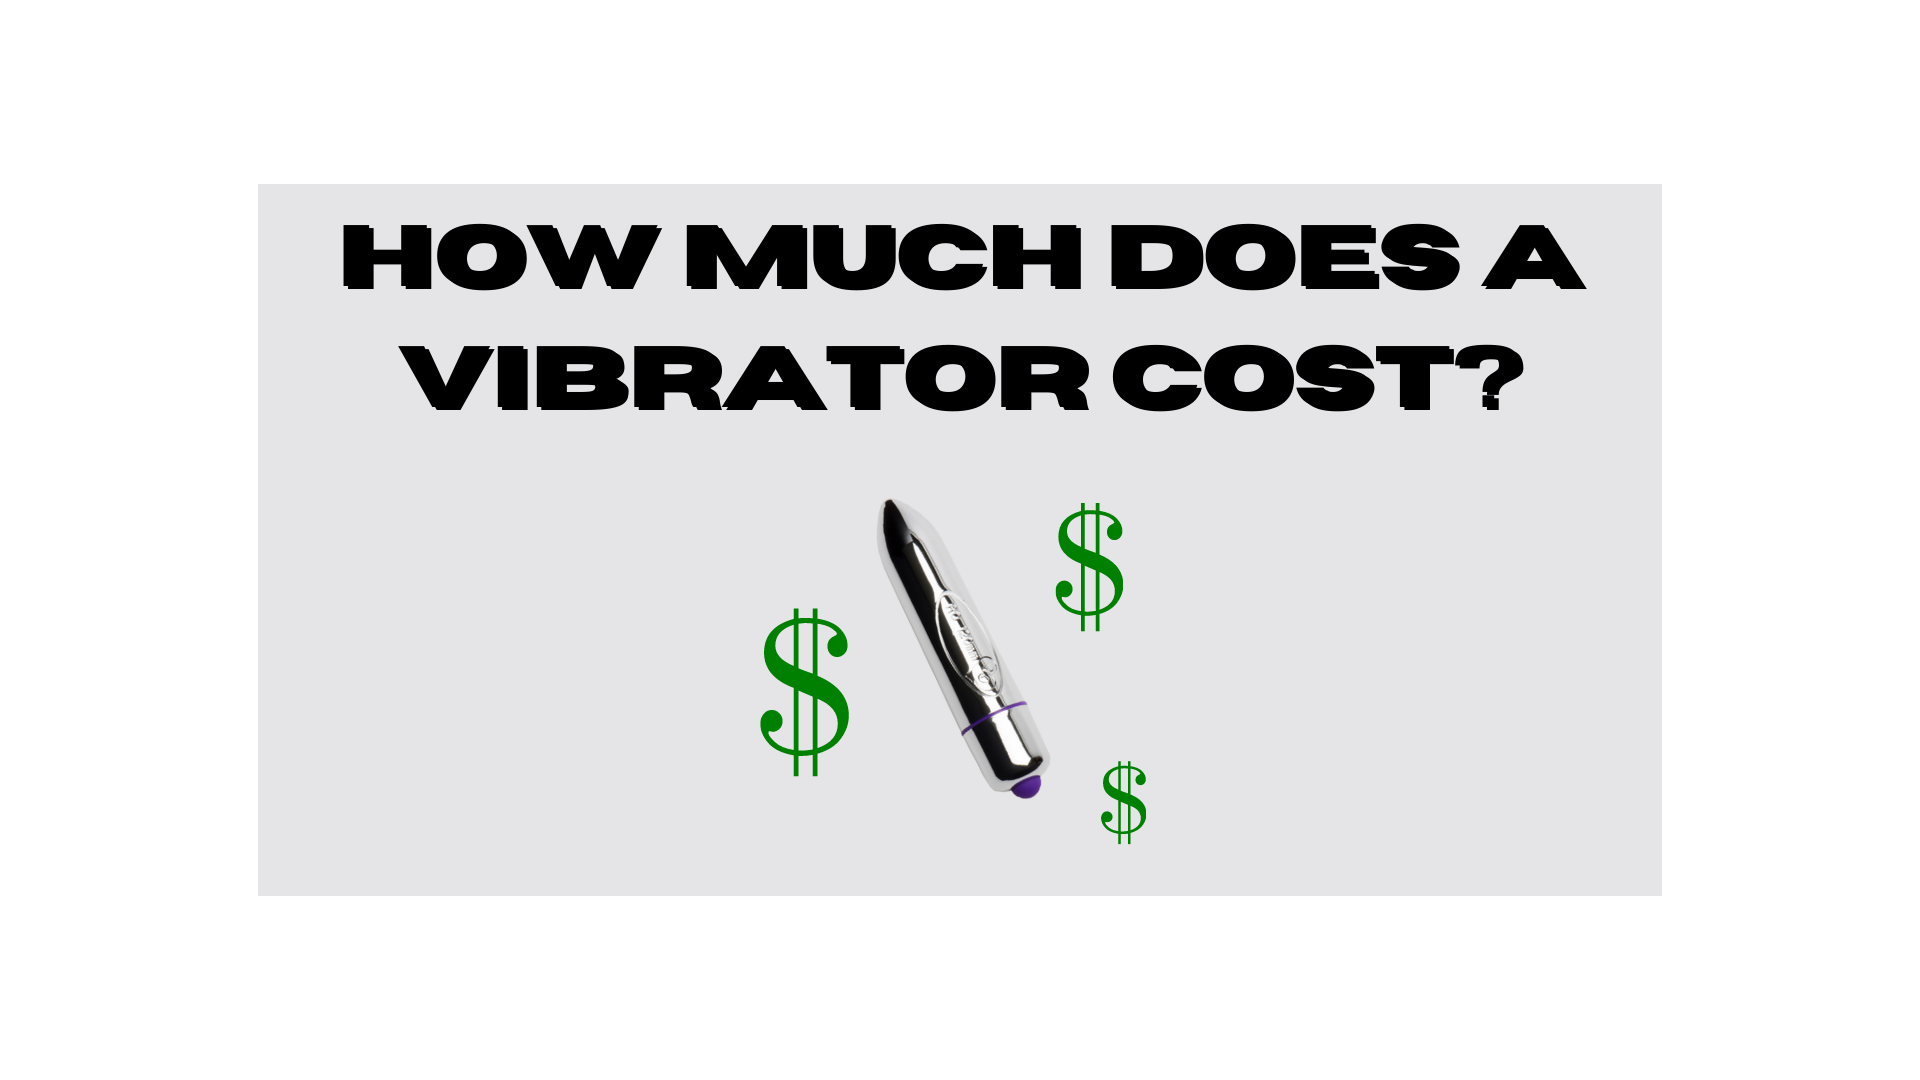 How much does a vibrator cost?